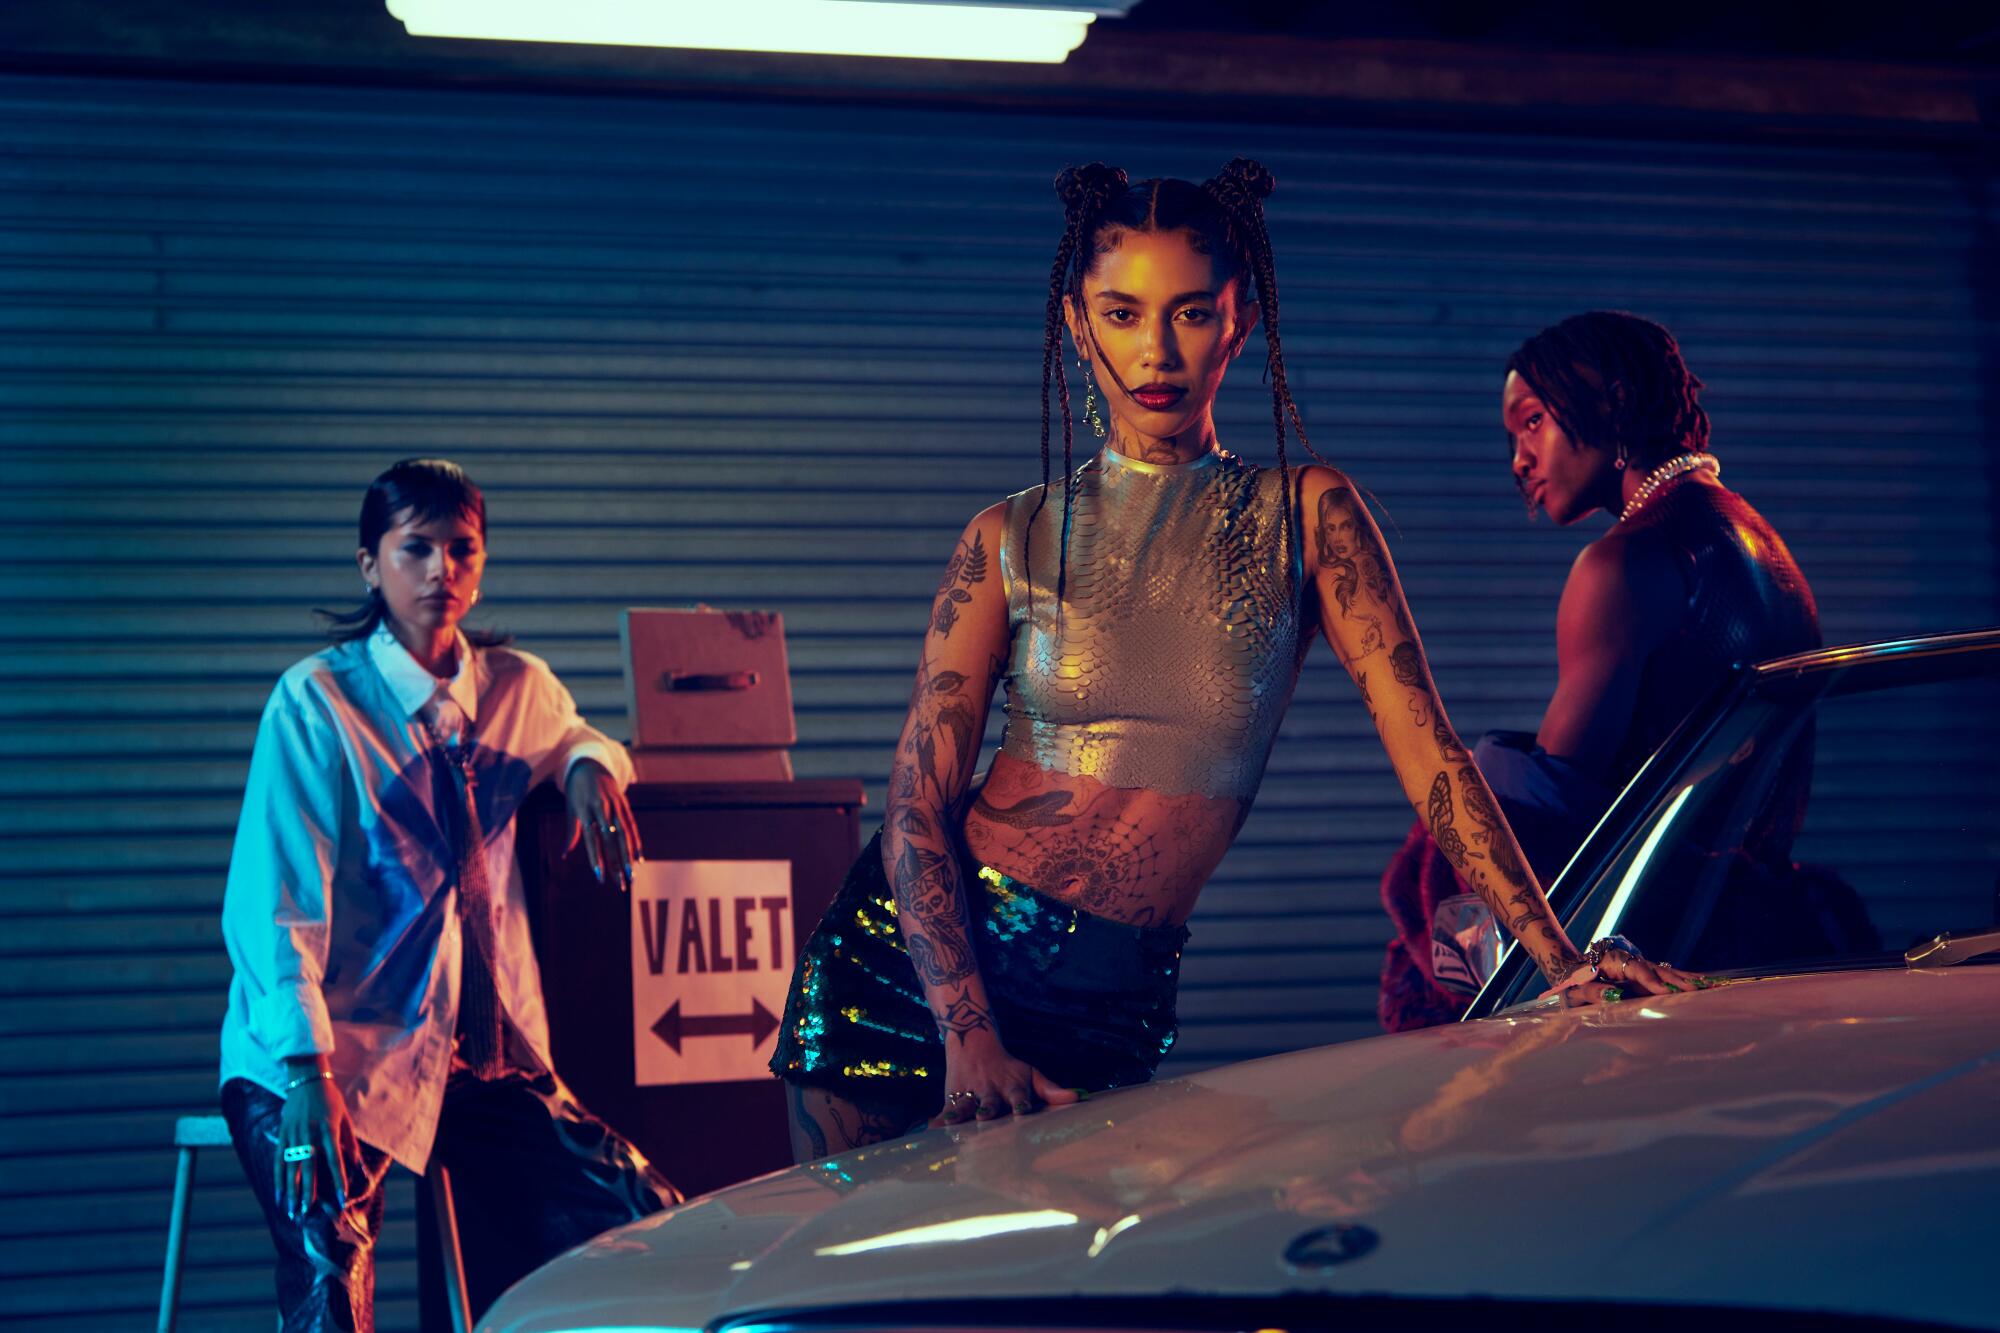 A tattooed woman leans against the hood of a car, while two figures in the background stand beside a "valet" sign.